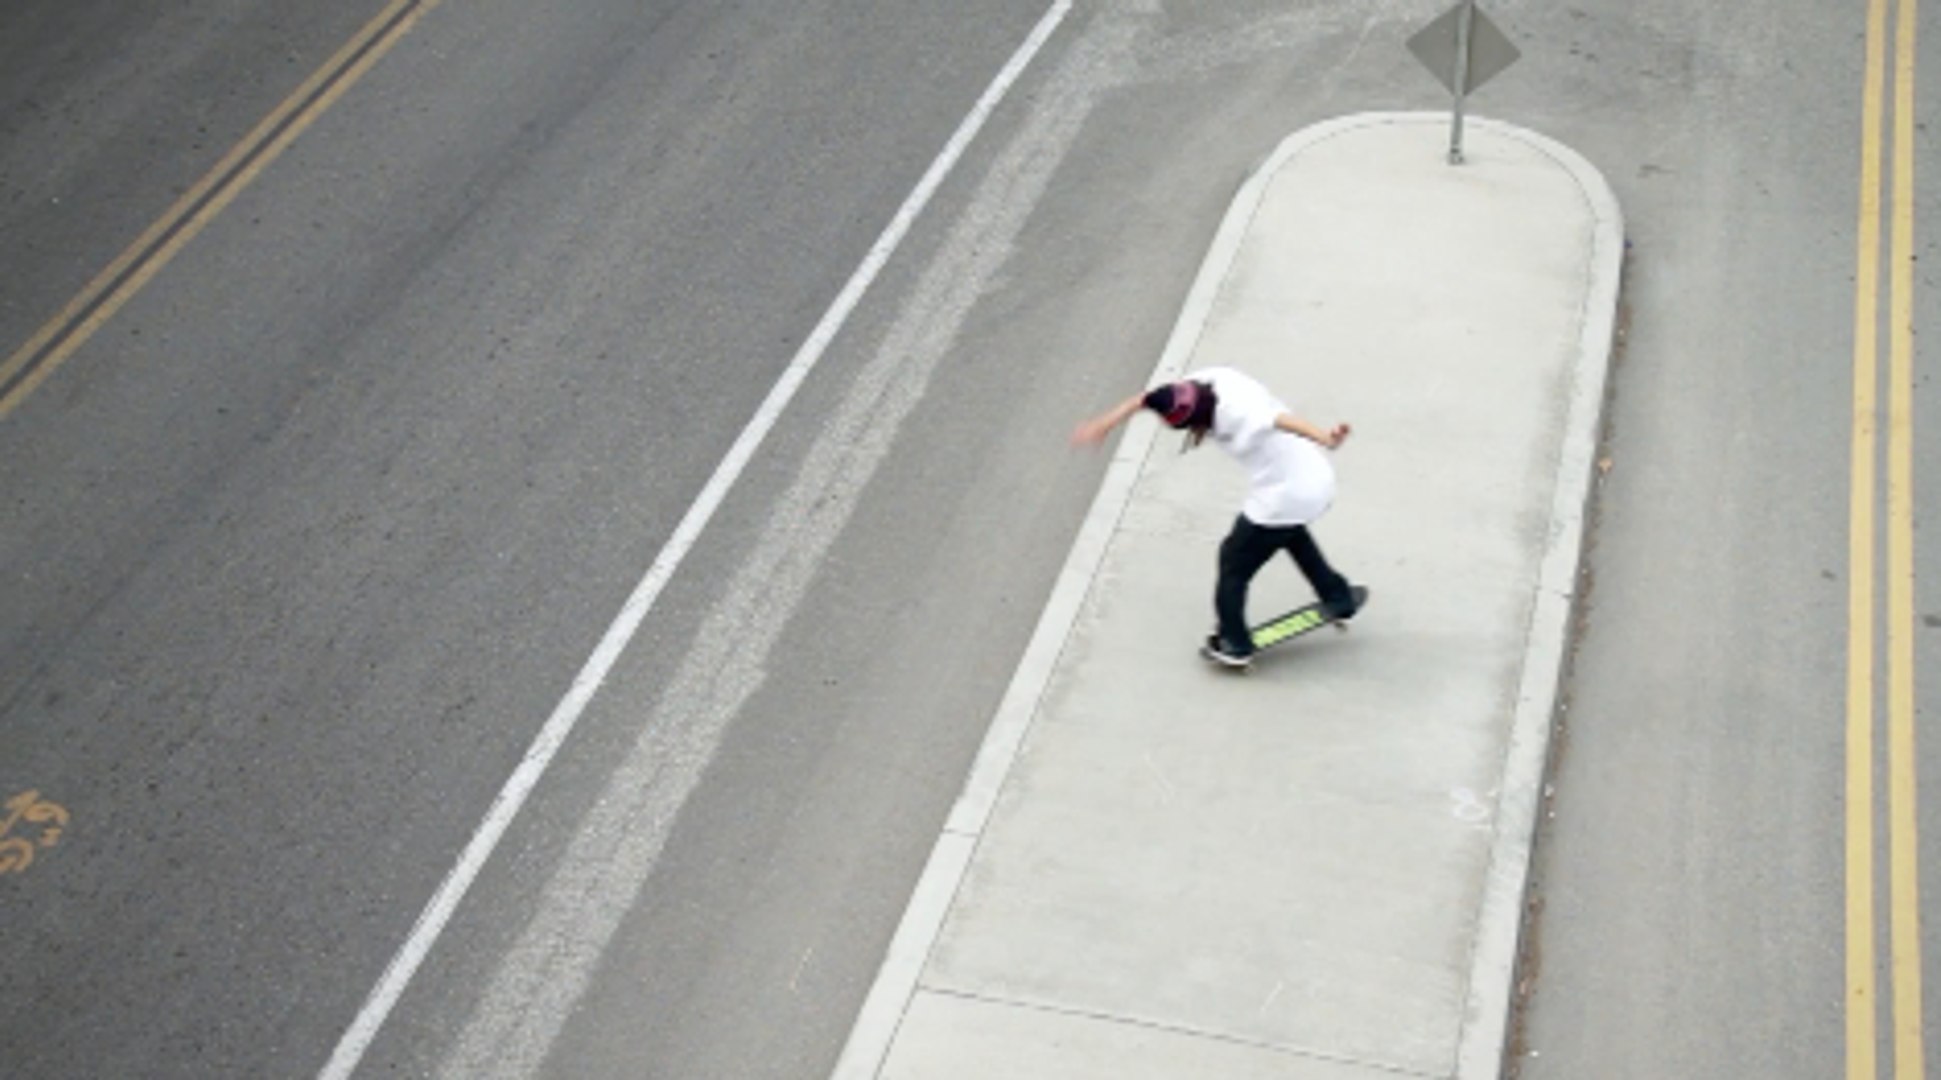 Torey Pudwill is Ready for the Street League Nike SB World Tour -  Skateboarding - Vidéo Dailymotion